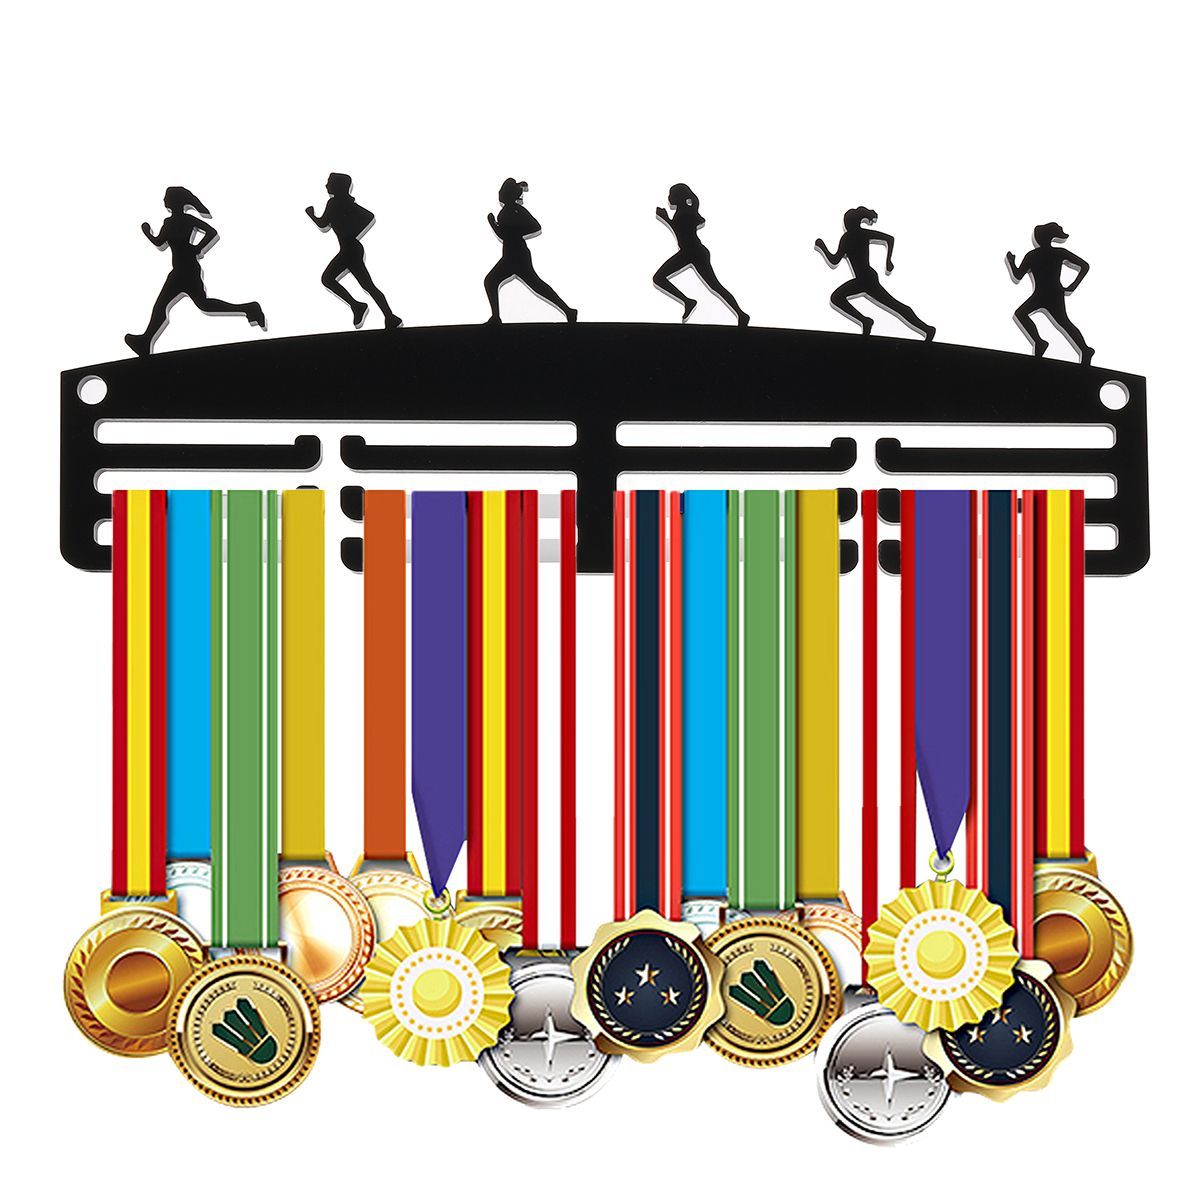 300x115x5mm-Acrylic-Personalised-3-Tier-Medal-Hanger-Holder-Rack-1667984